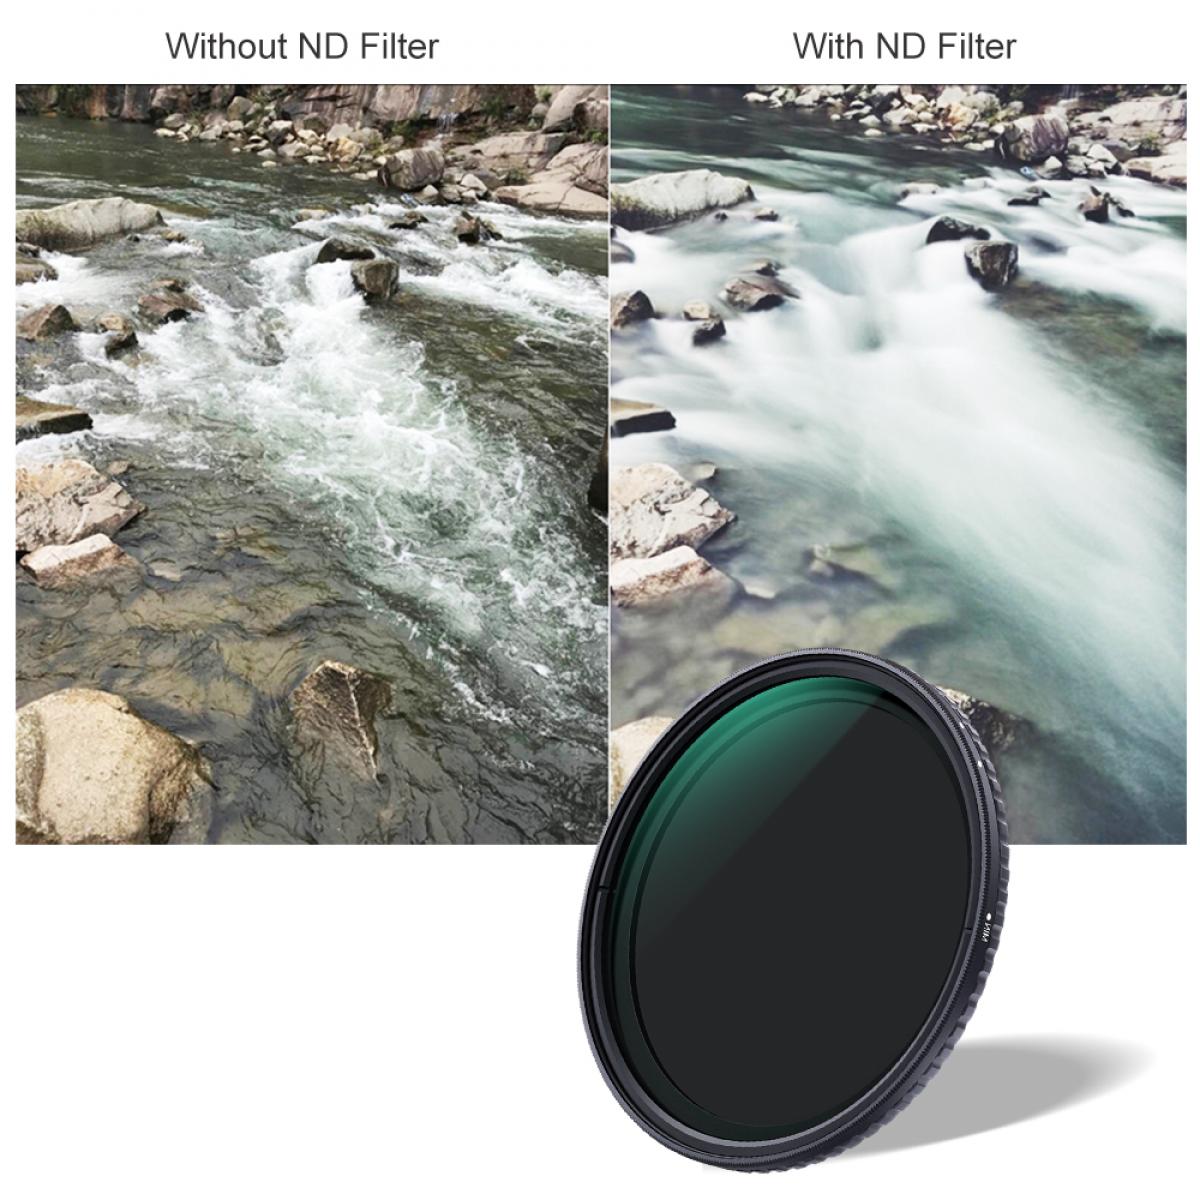 K&F Concept ND2-32 Variable Neutral Density ND Filter Nano-X Coated 58mm